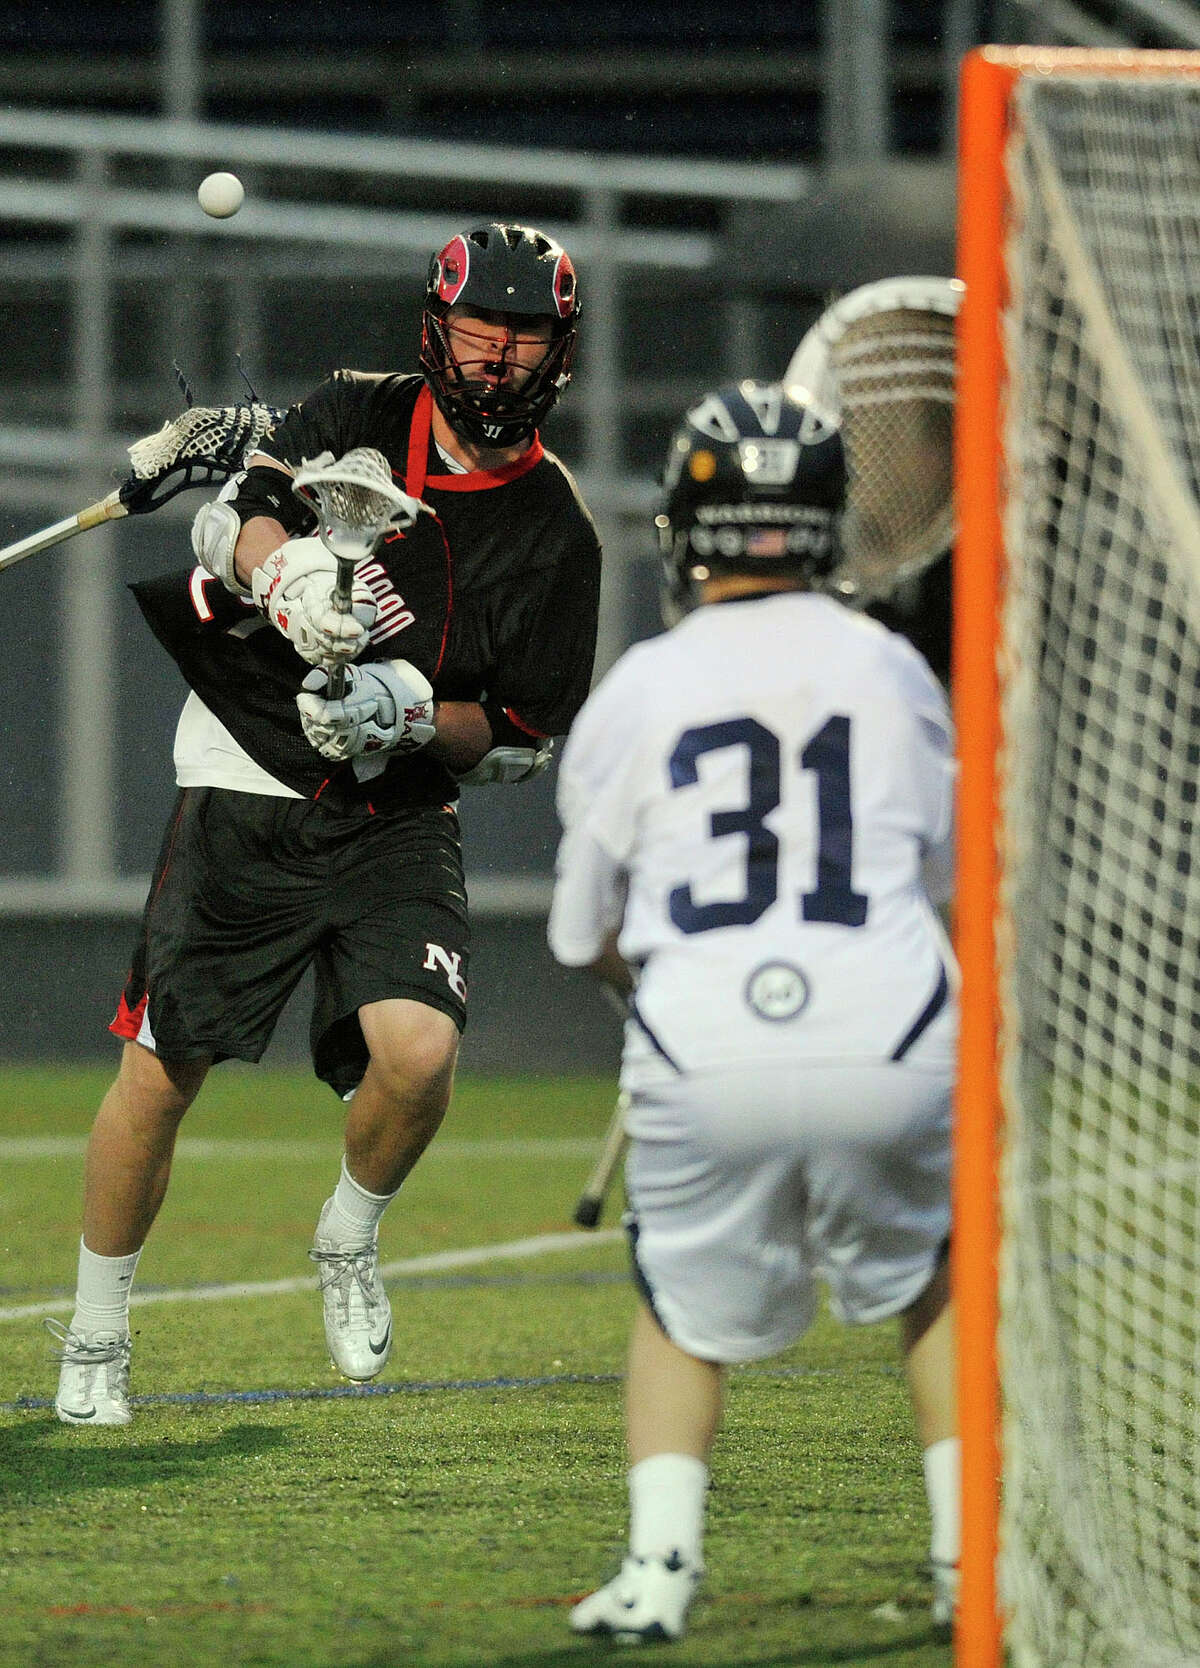 New Canaan's Kyle Smith shoots on Wilton goalie Joshua Worley during their lacrosse game at Wilton High School in Wilton, Conn., on Tuesday, April 15, 2014.